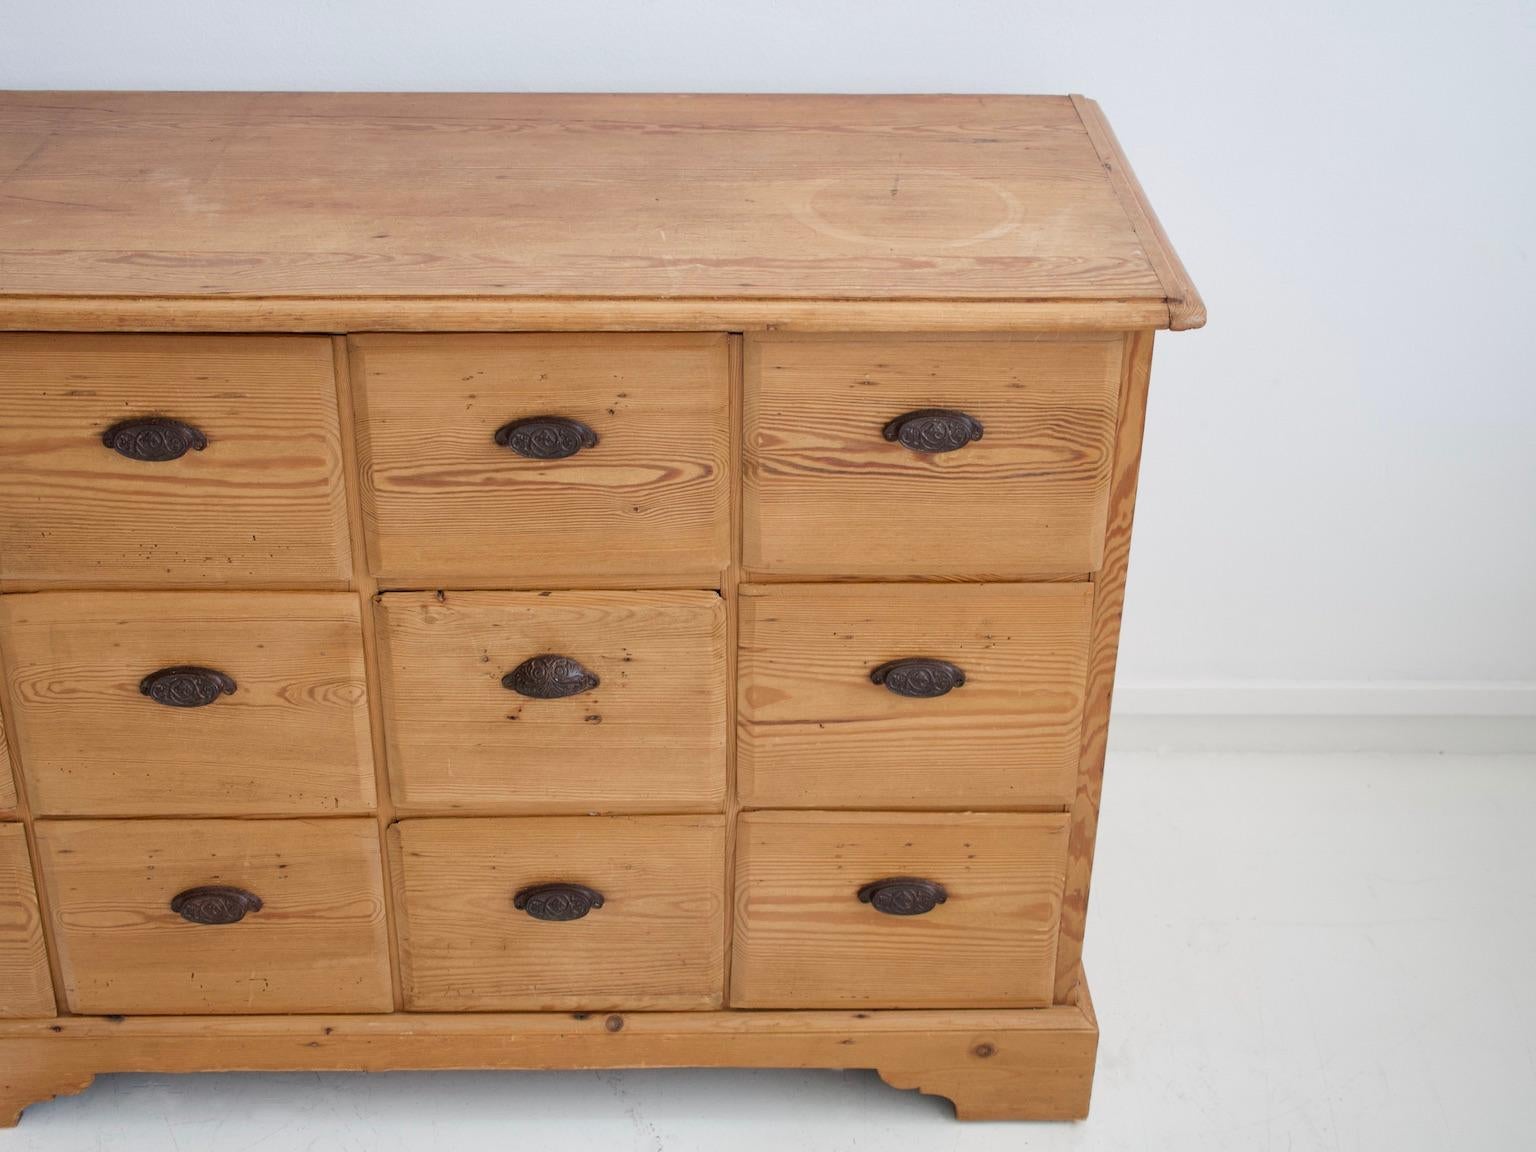 20th Century Long Wooden Chest of Drawers / Store Counter